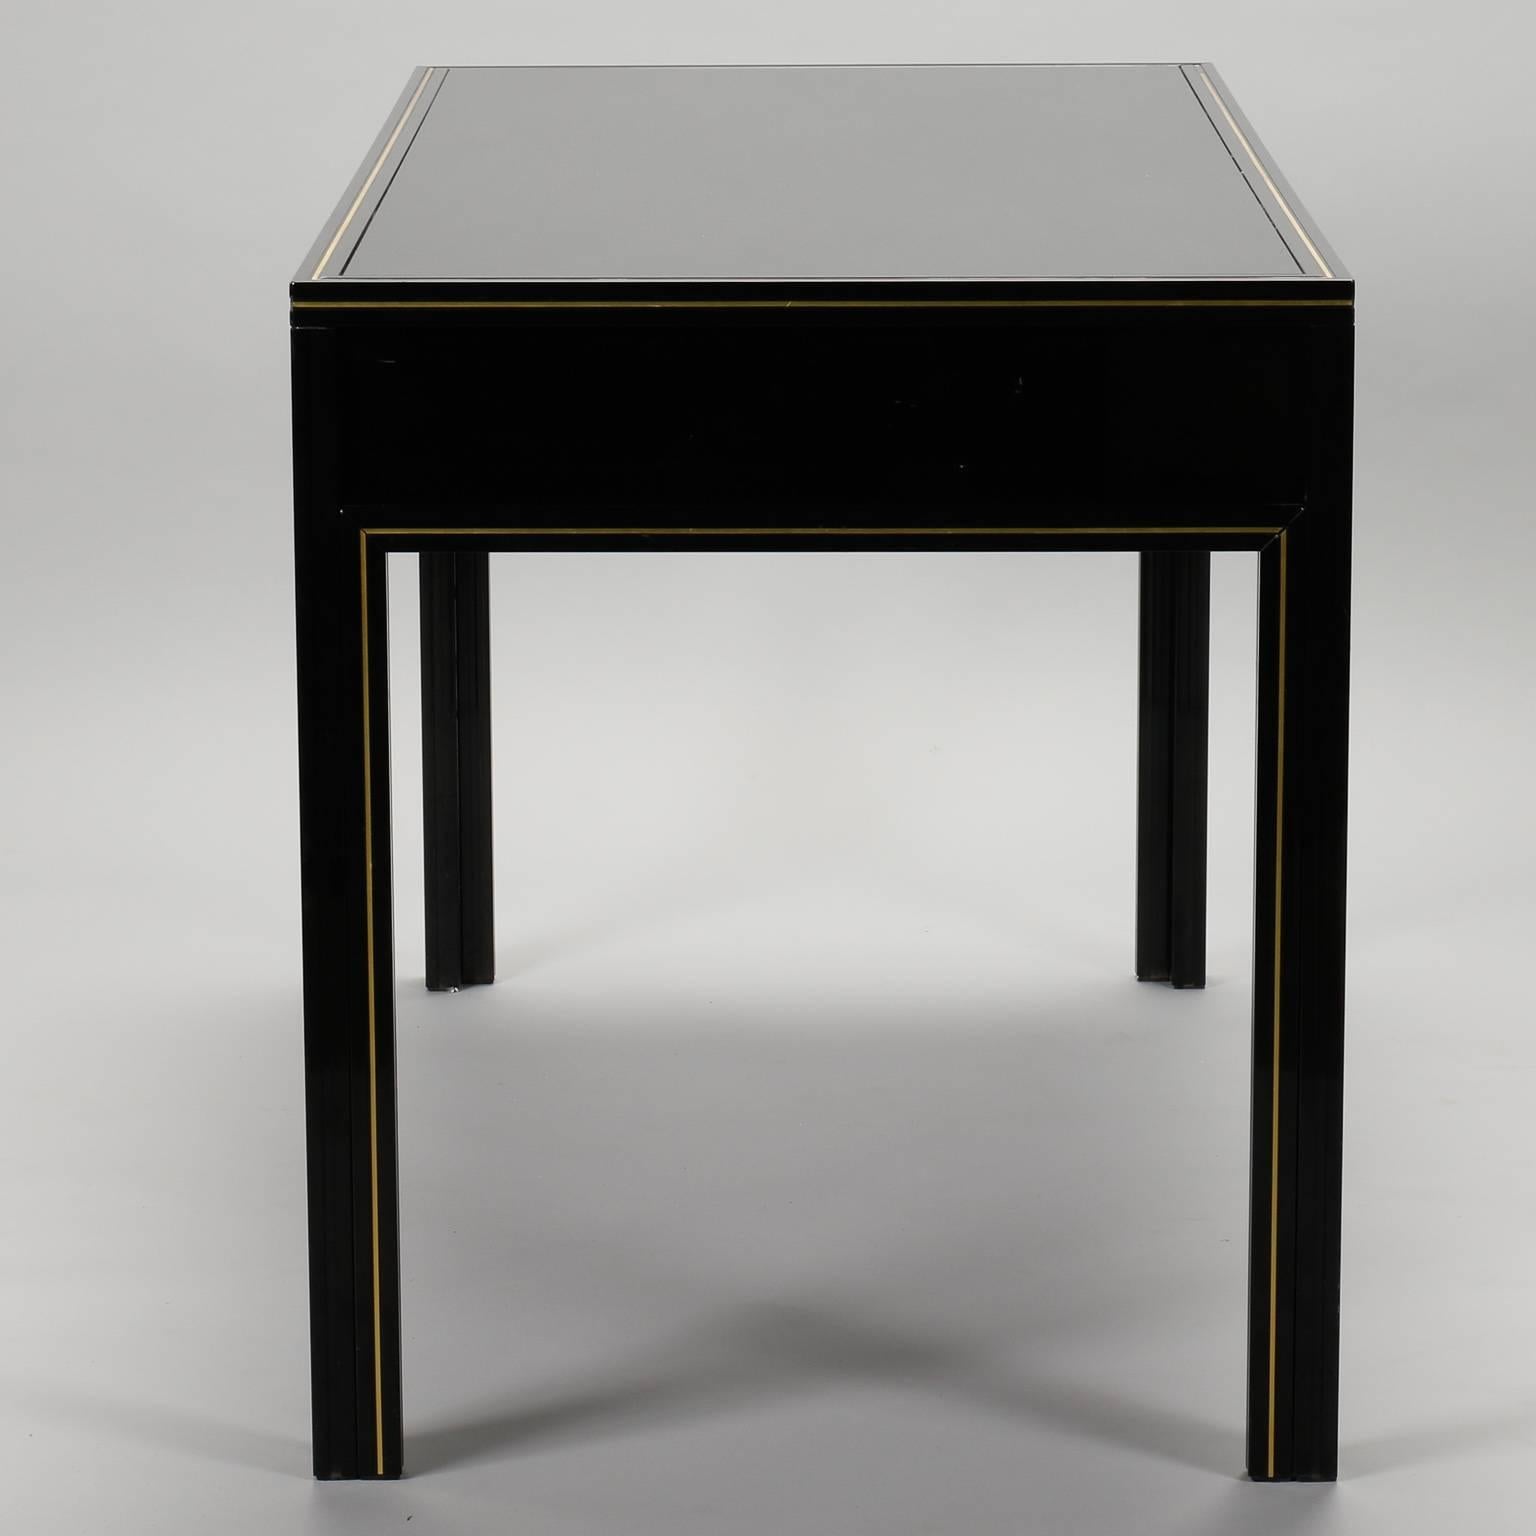 Black lacquered wood desk by Paris maker Pierre Vandel. Brass hardware and detail trim, circa 1970s. Other pieces from this collection available at the time of this posting. Please inquire if interested.